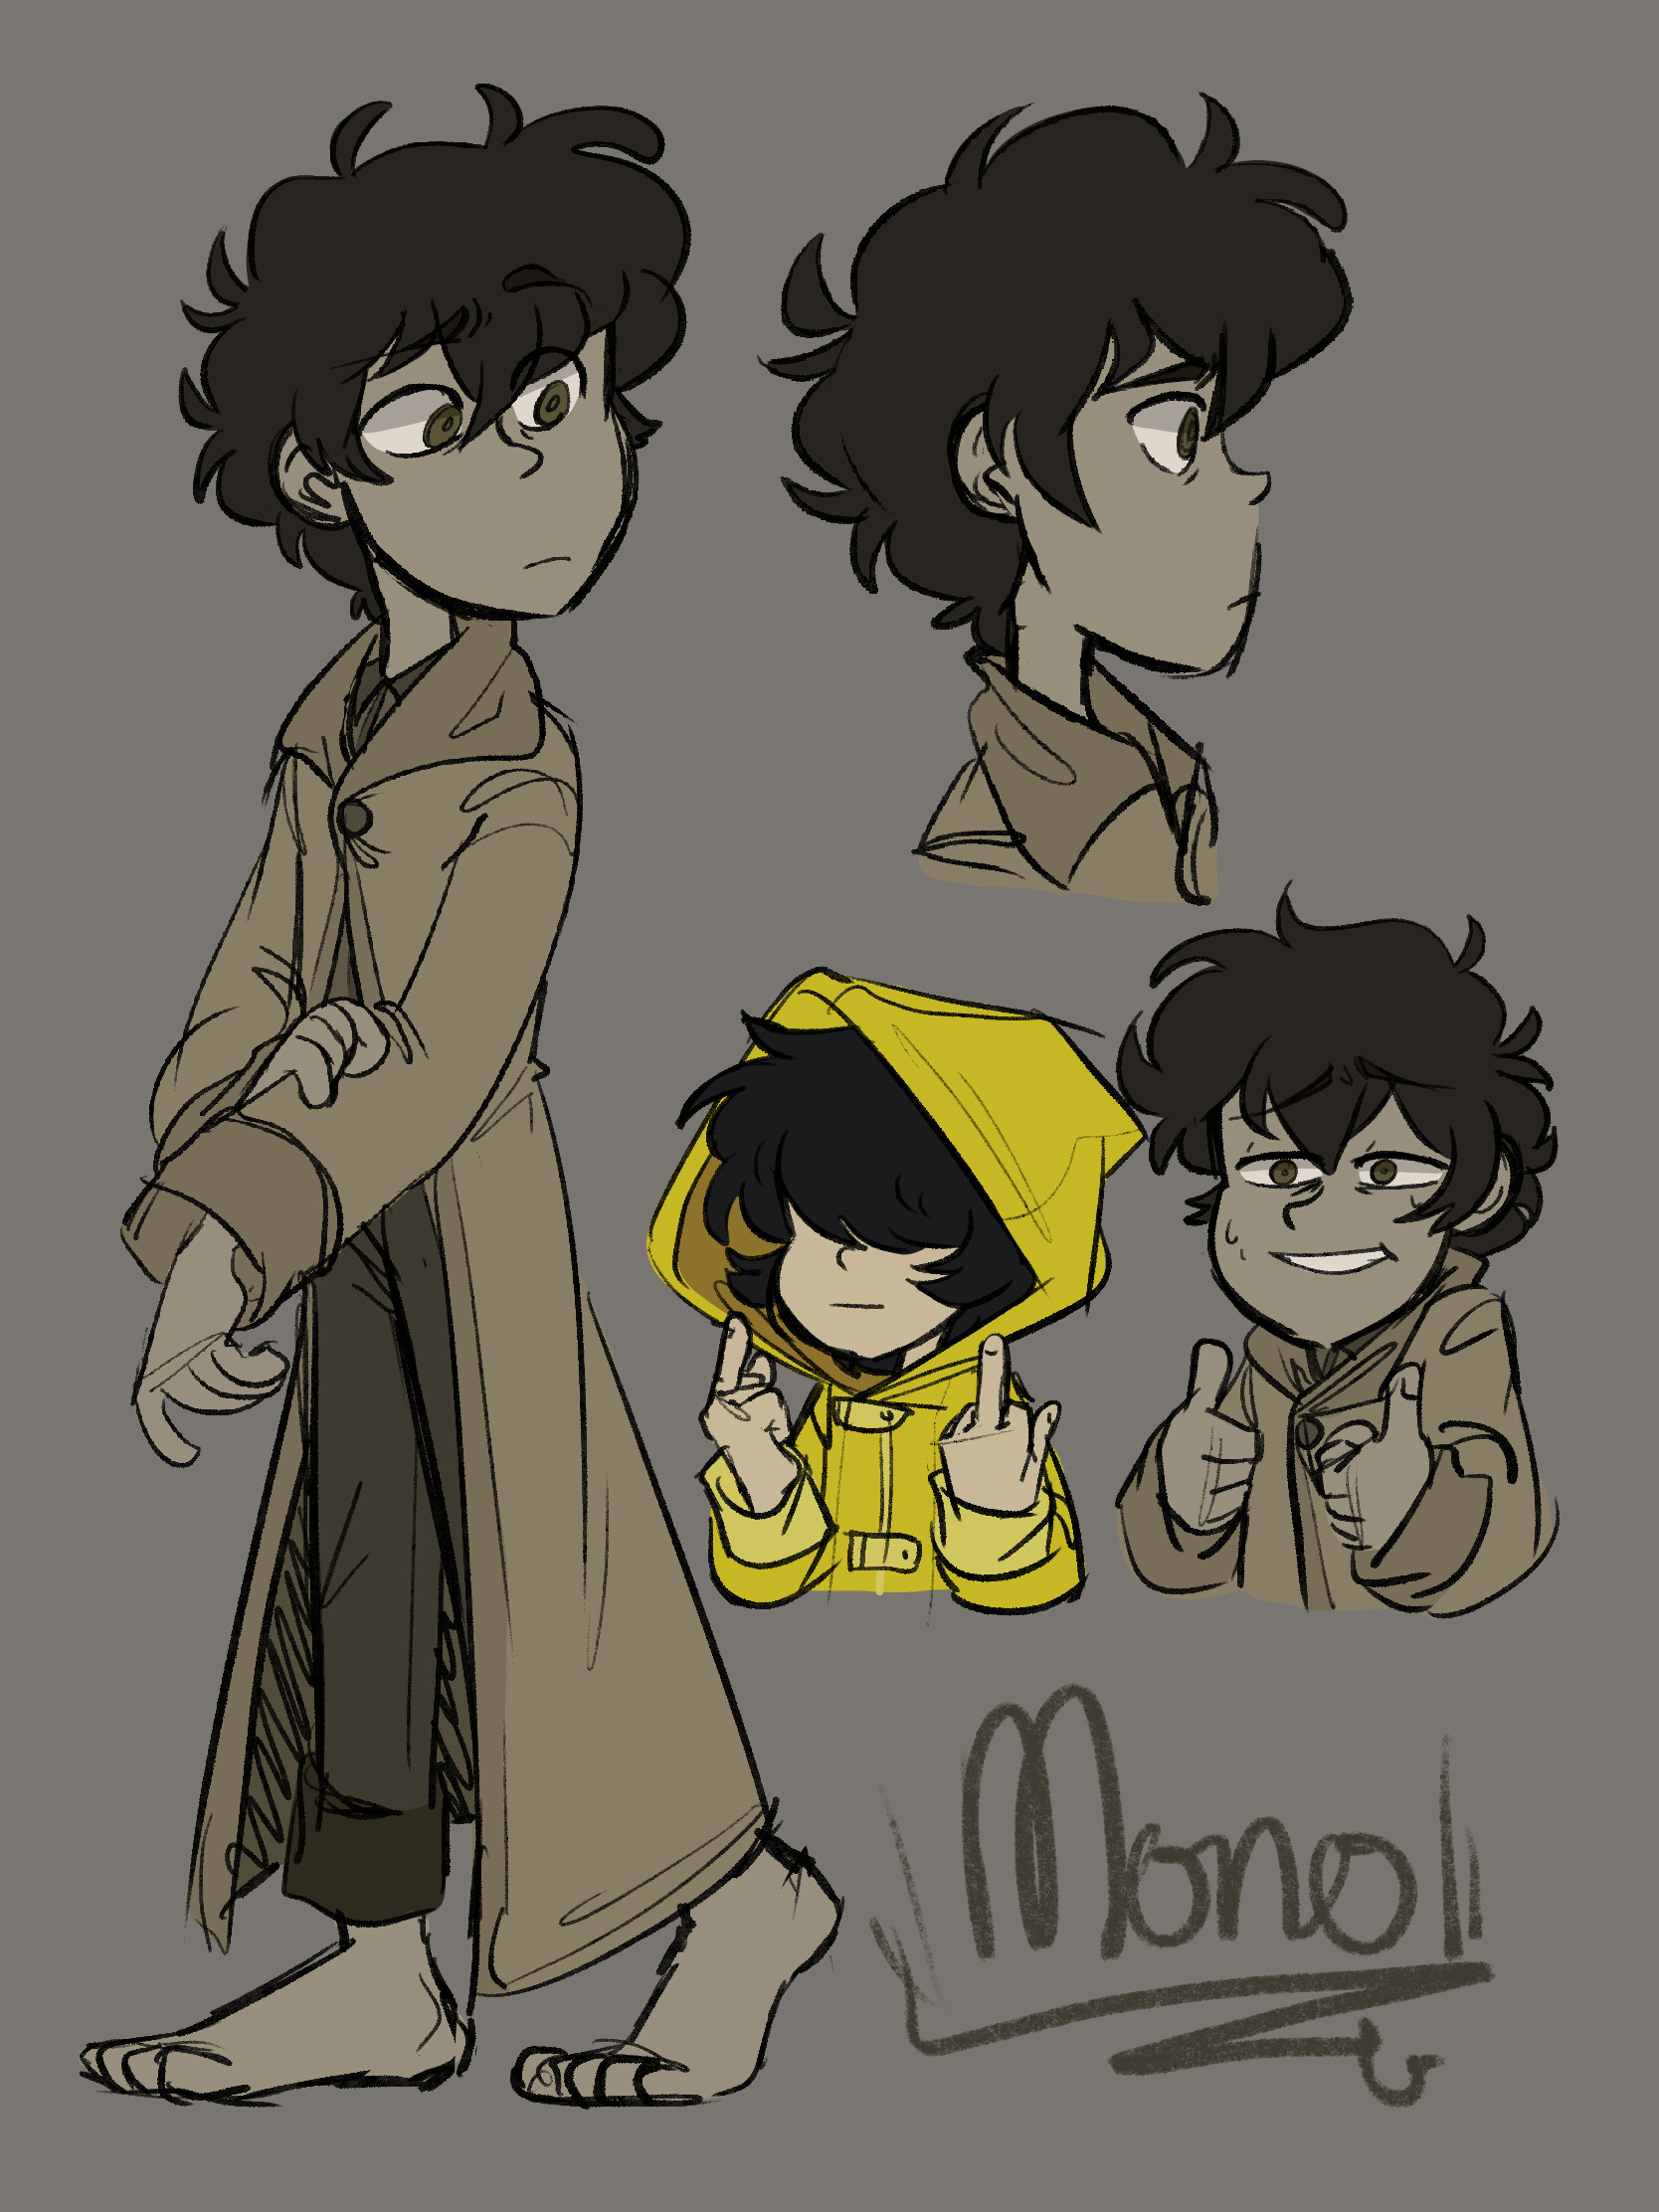 Mono Reference + Others  Little Nightmares 2 by StaticSyntax on DeviantArt